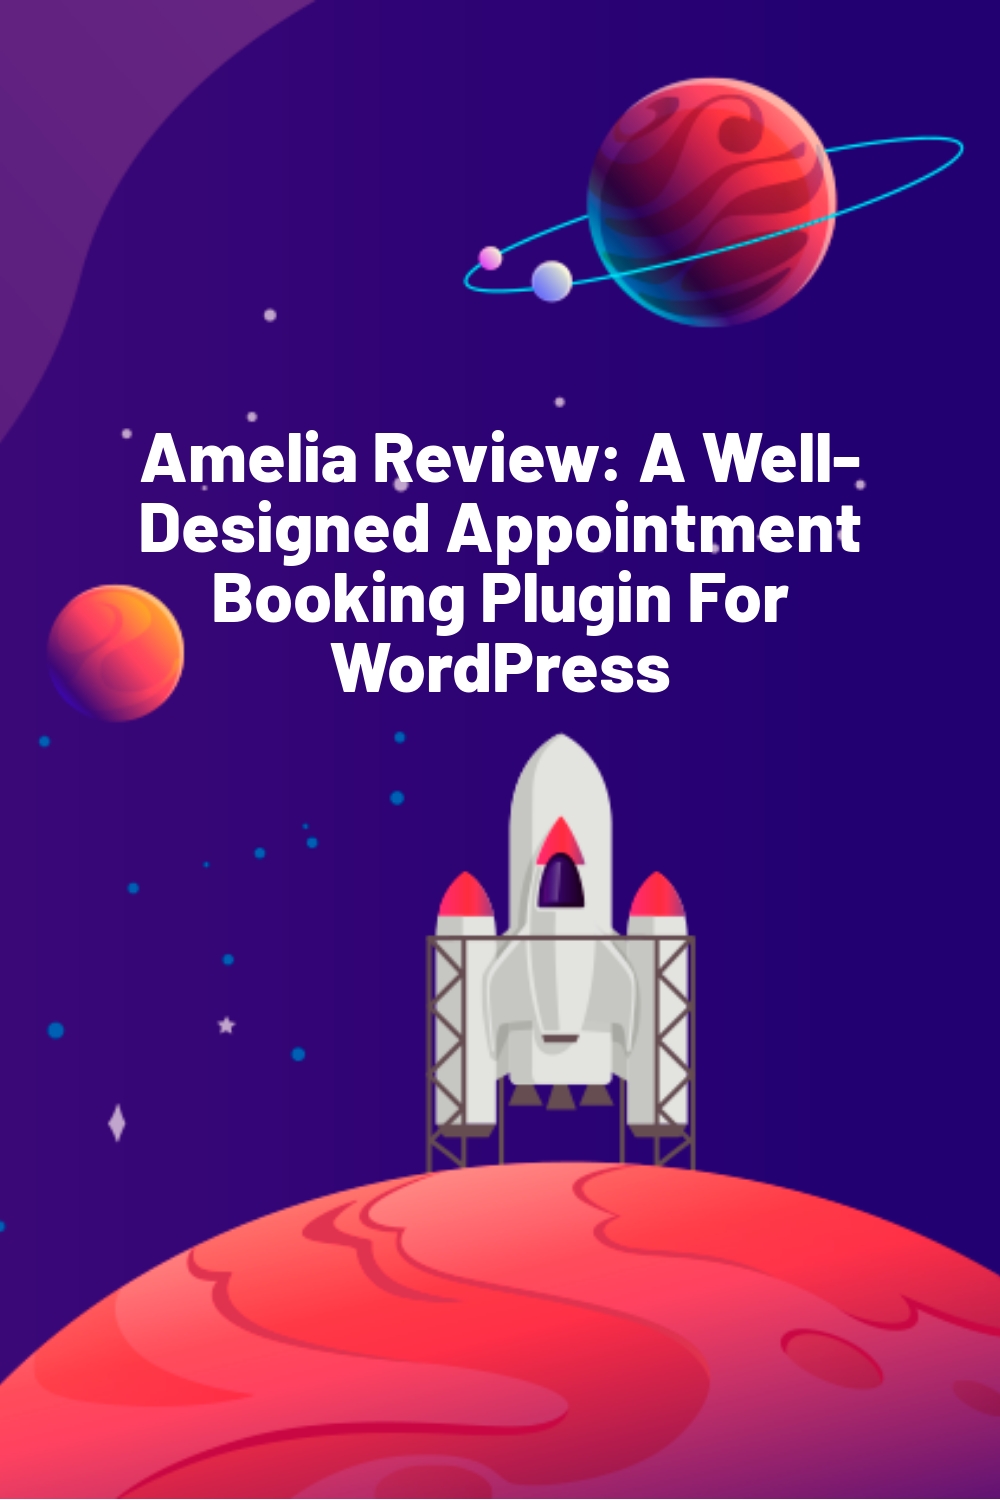 Amelia Review: A Well-Designed Appointment Booking Plugin For WordPress